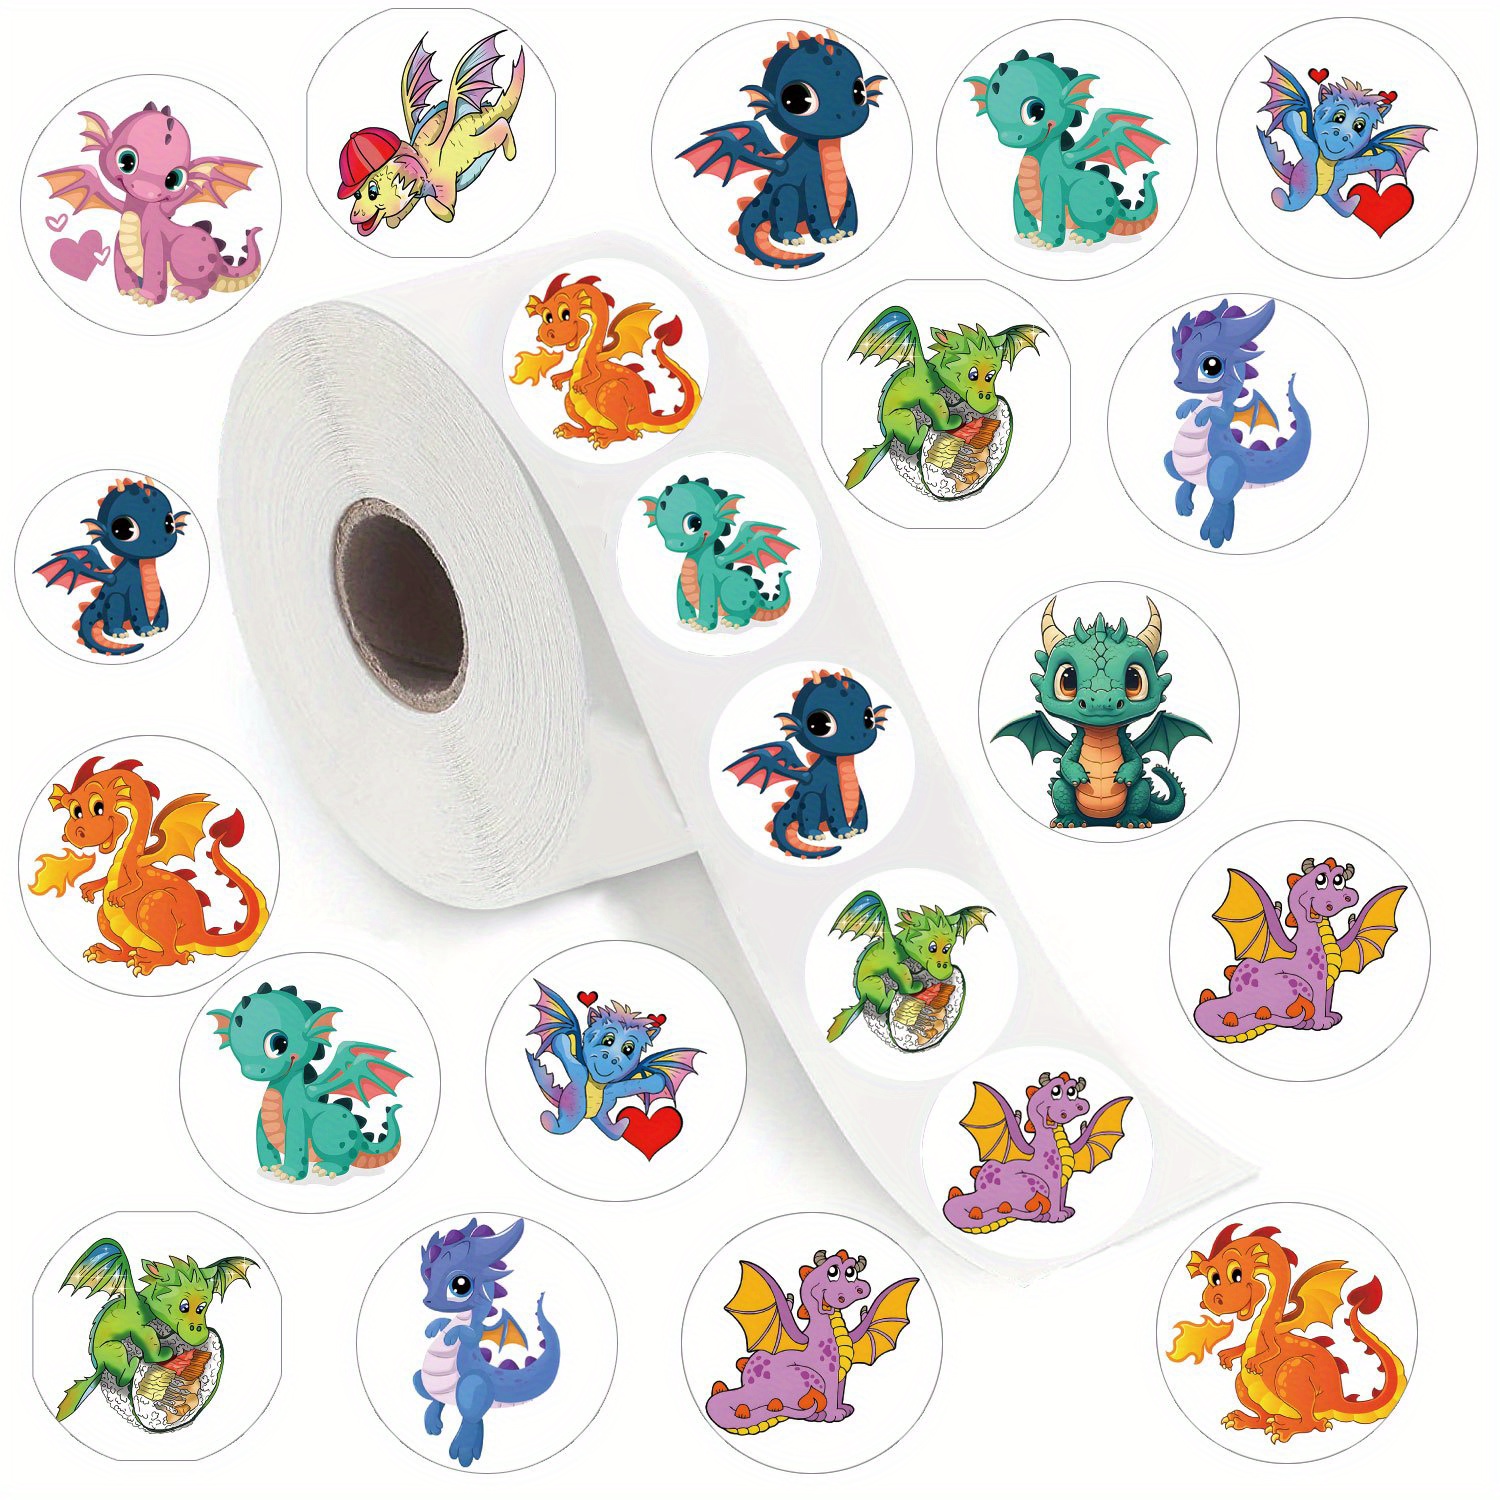 

500pcs/roll Self-adhesive Flying Dragon Stickers, Rewards & Office Decoration Sticker Label Decorated Suitcase Water Bottle Diy Phone Laptop Computer Skateboard